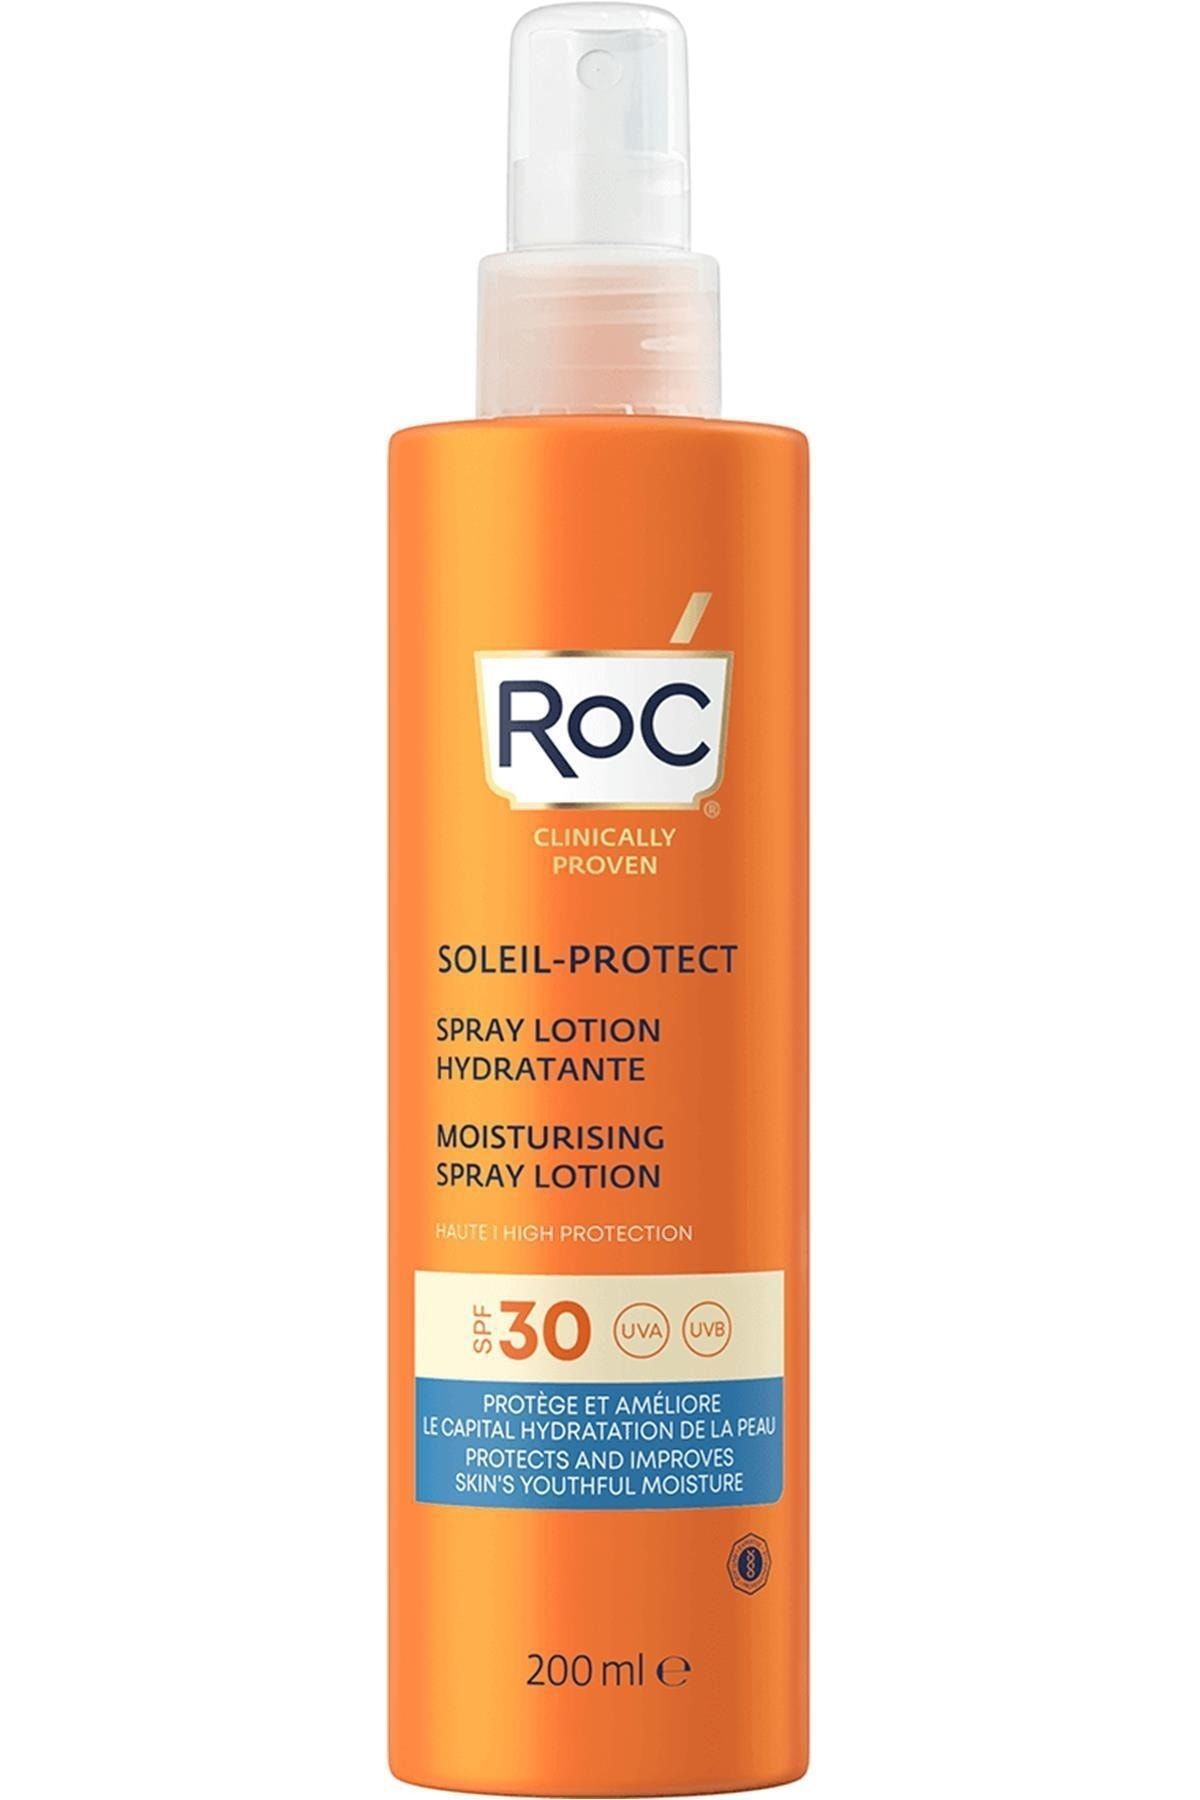 Roc Soleil Protect Spray Lotion Spf 30 200 ml